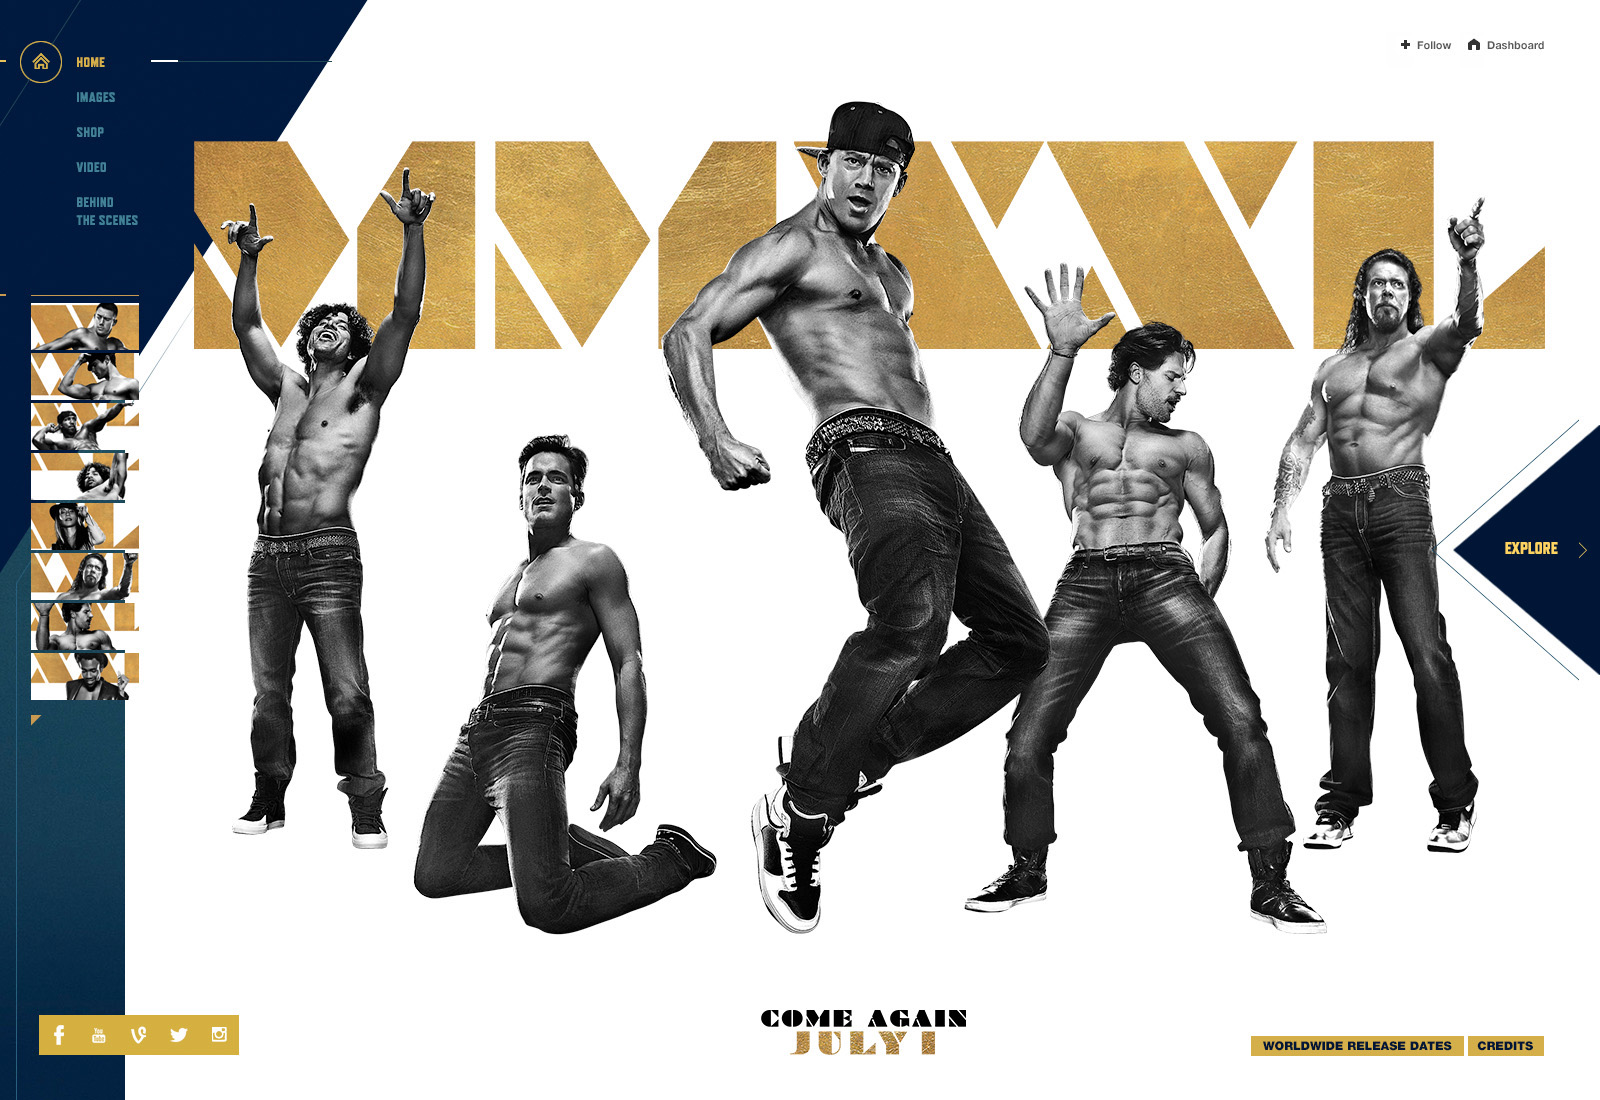 Magic Mike xxl channing movie warner brothers.